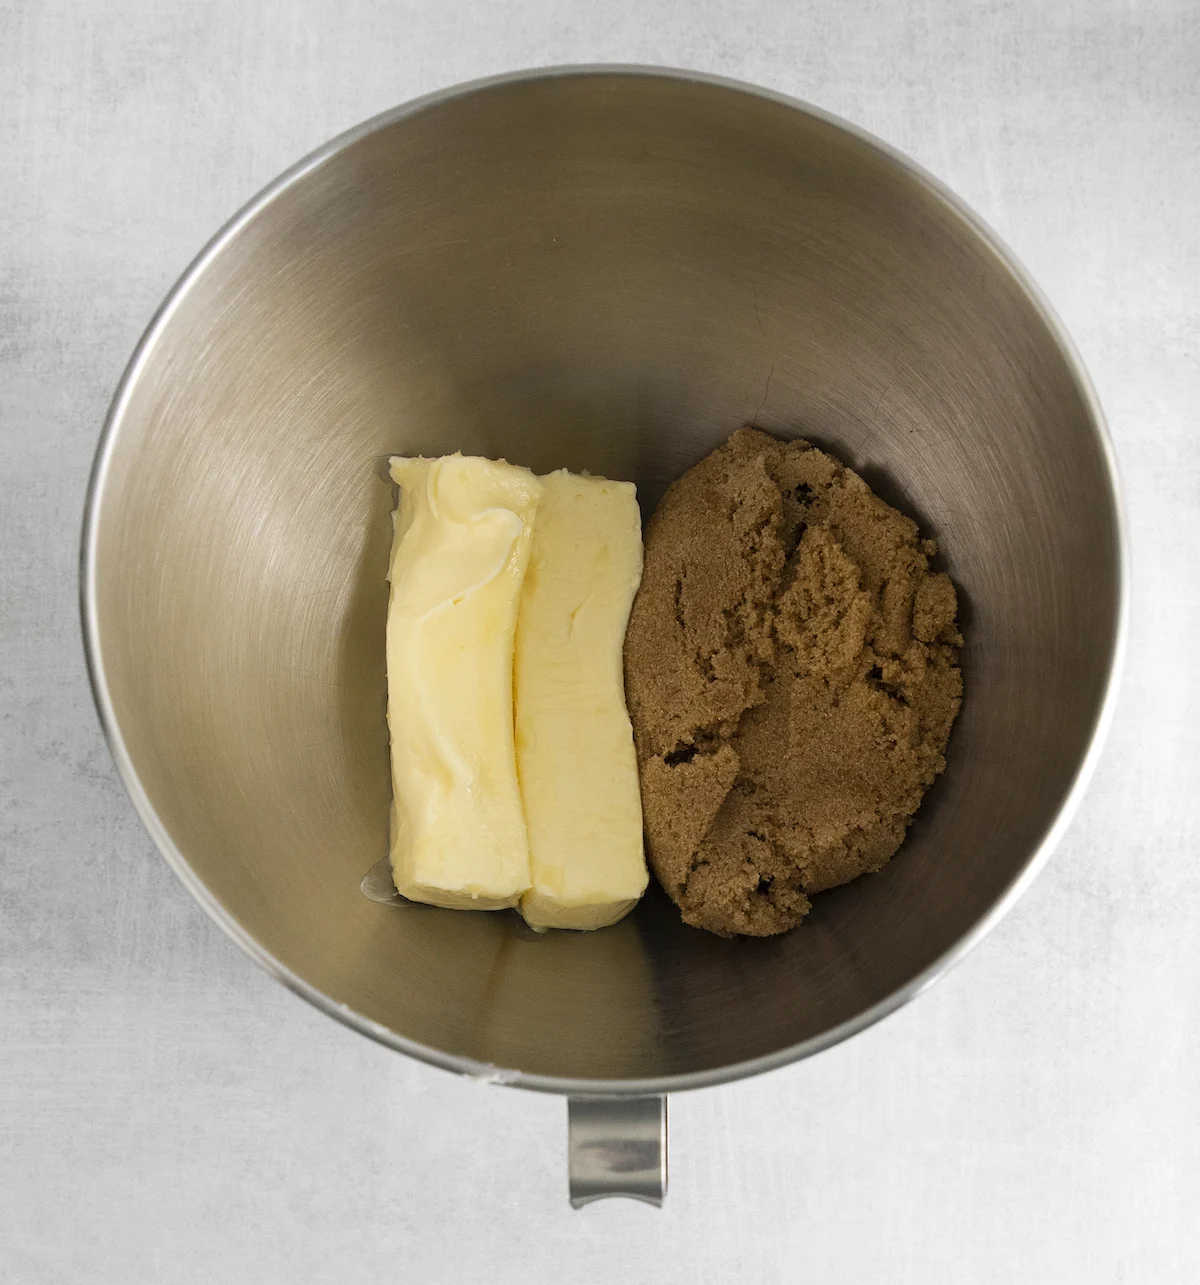 Two sticks of butter and brown sugar in a metal bowl